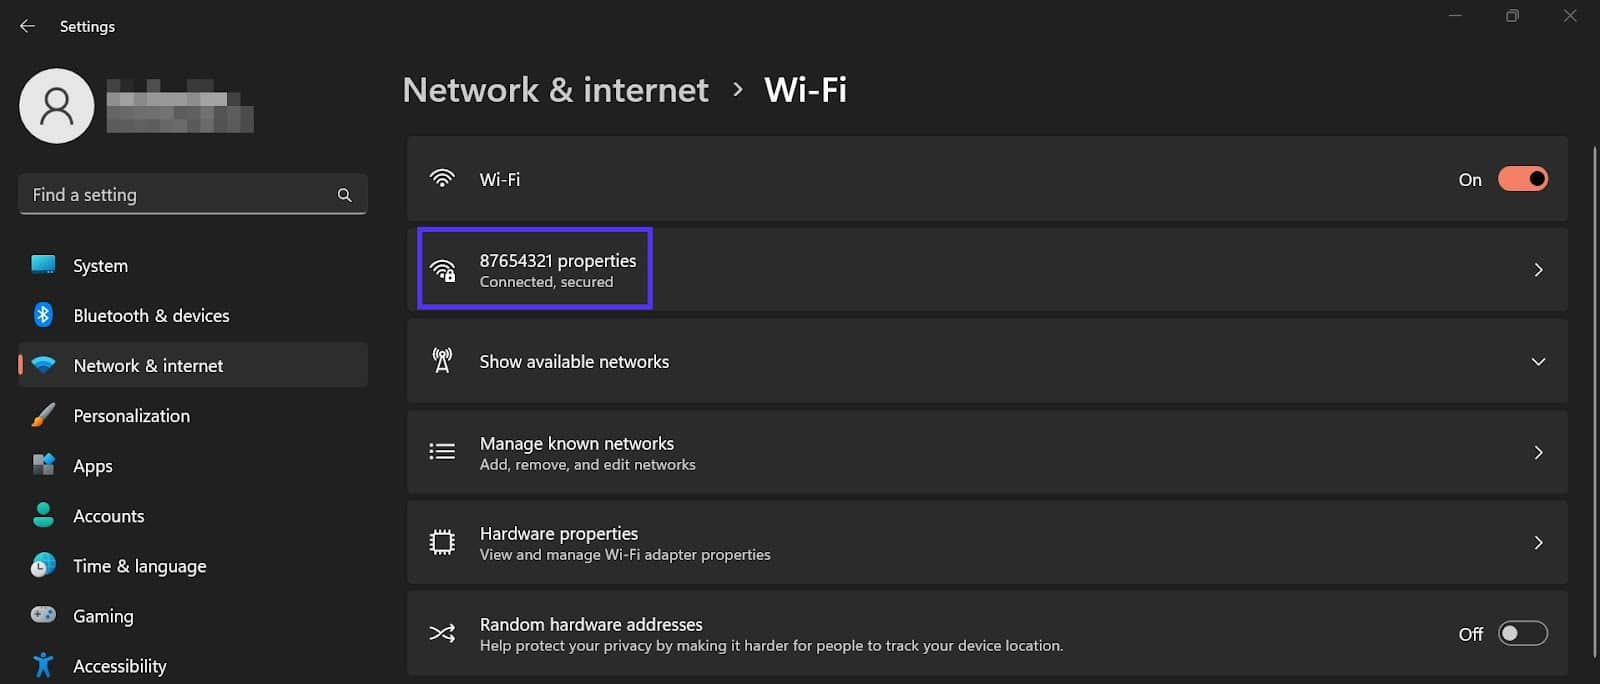 A screenshot showing how to access the network settings on Windows